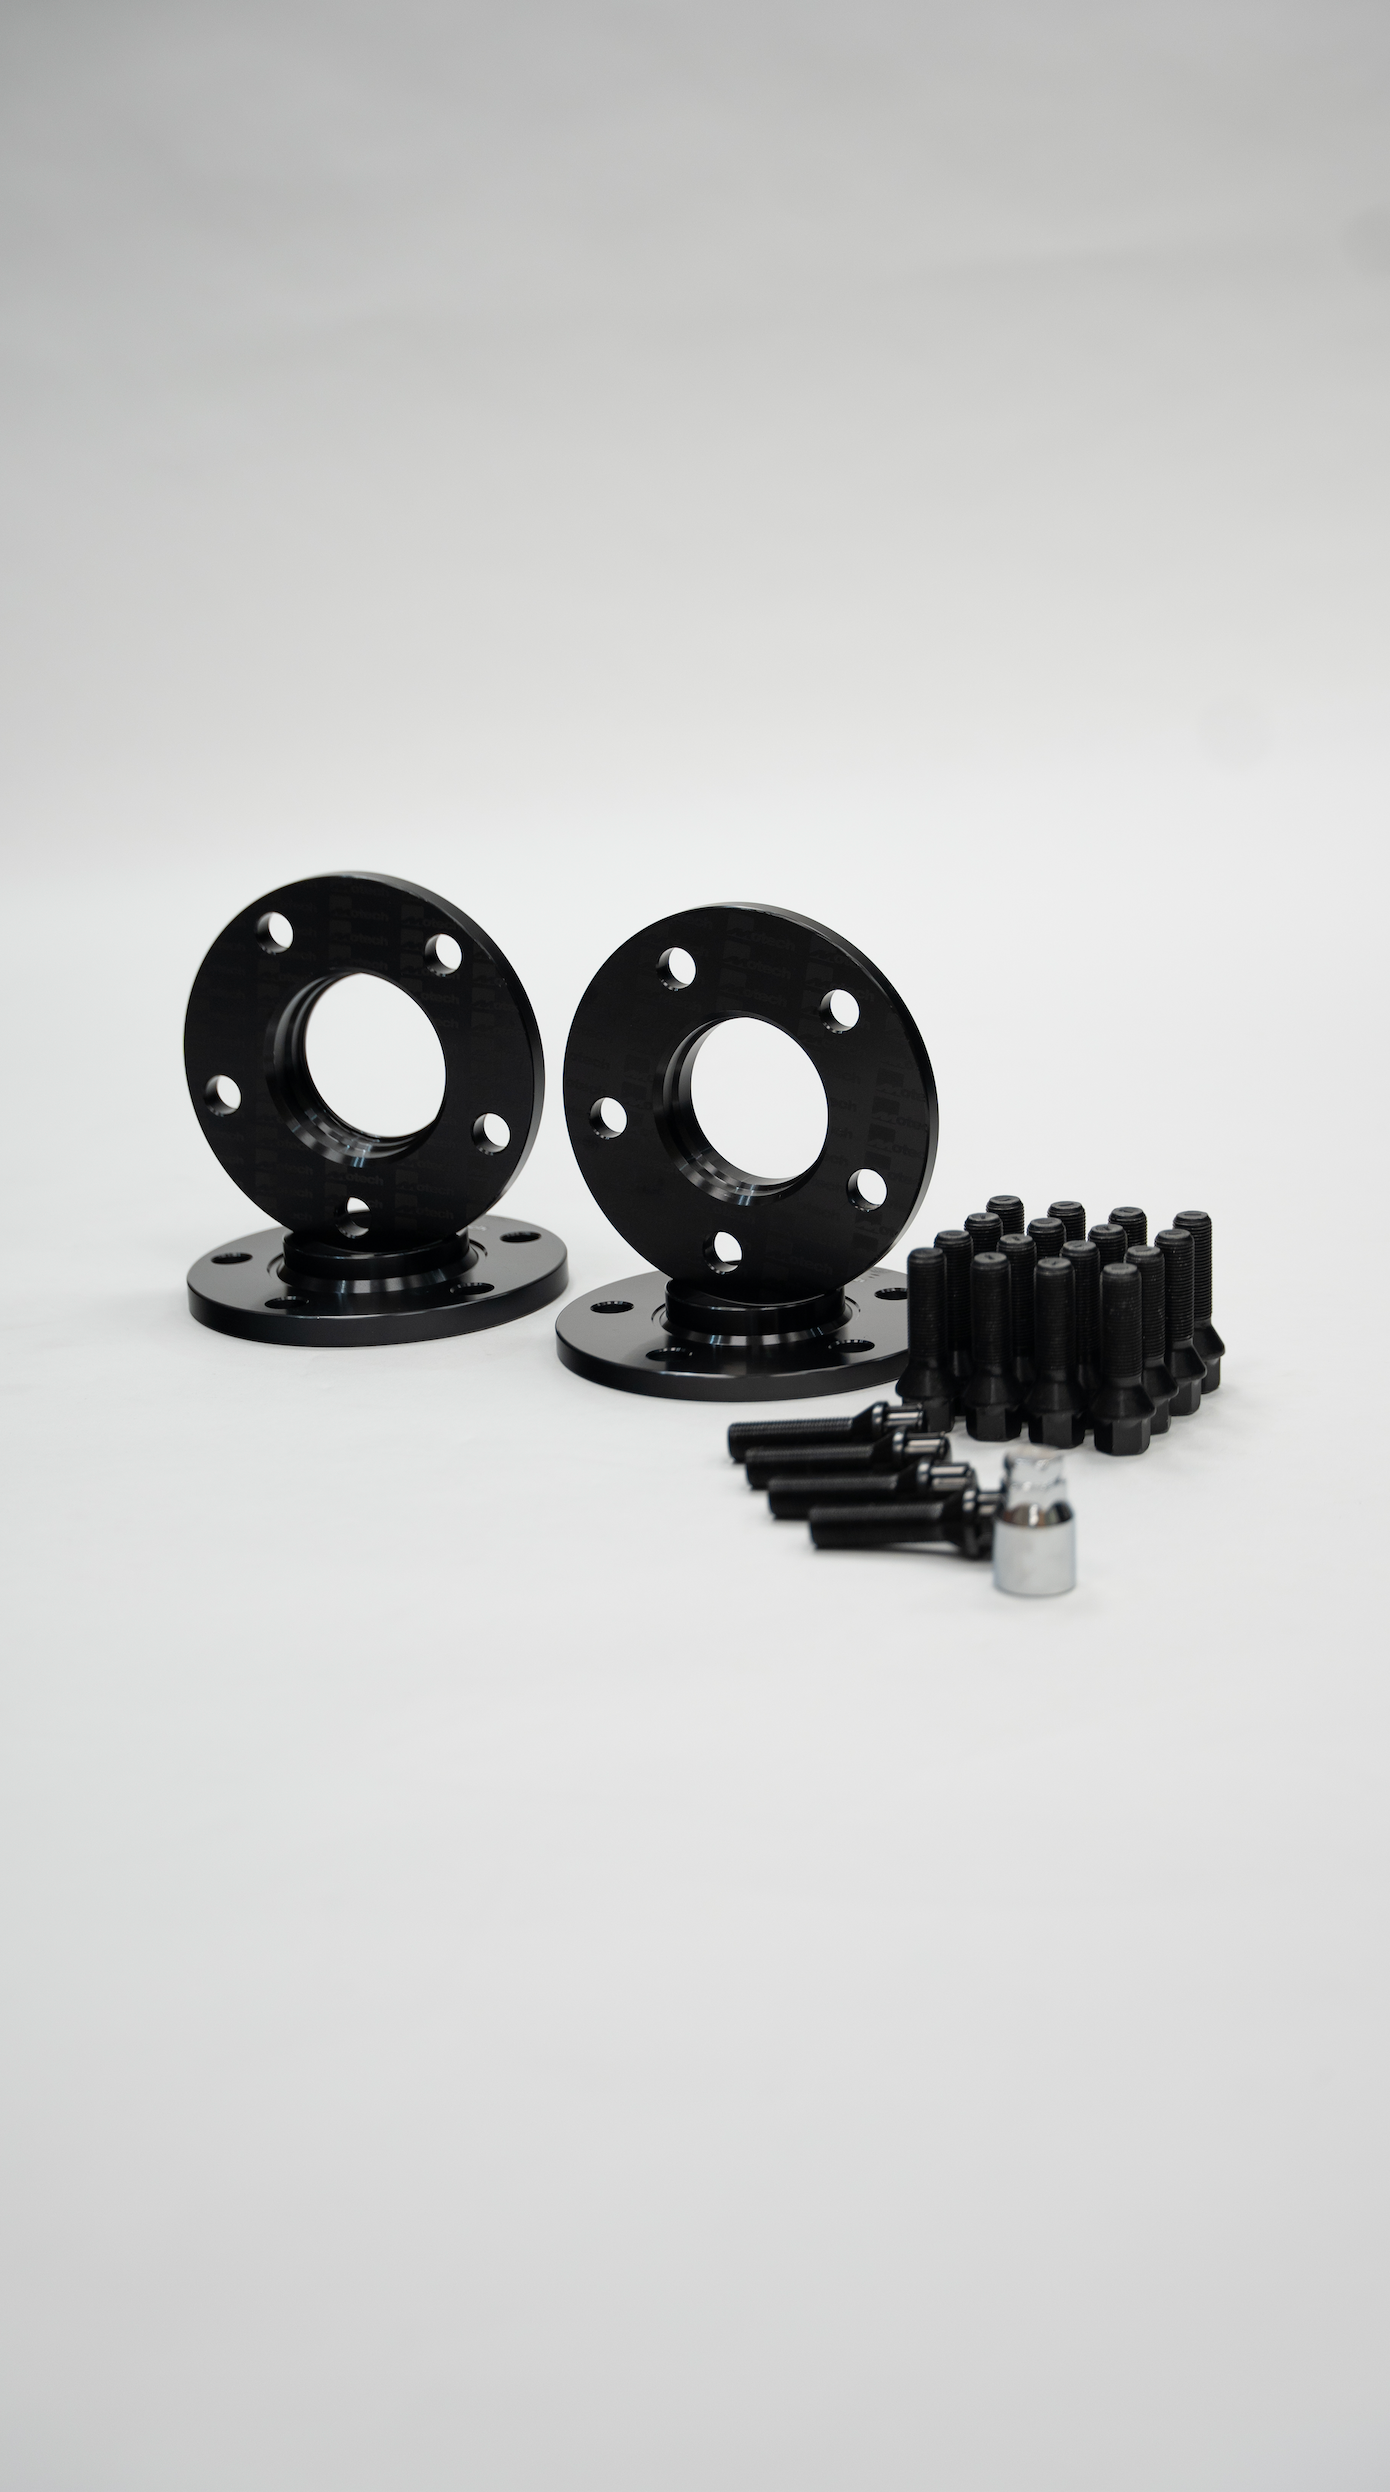 BMW F80 M3 and M3 Competition Wheel Spacers 2014-2020